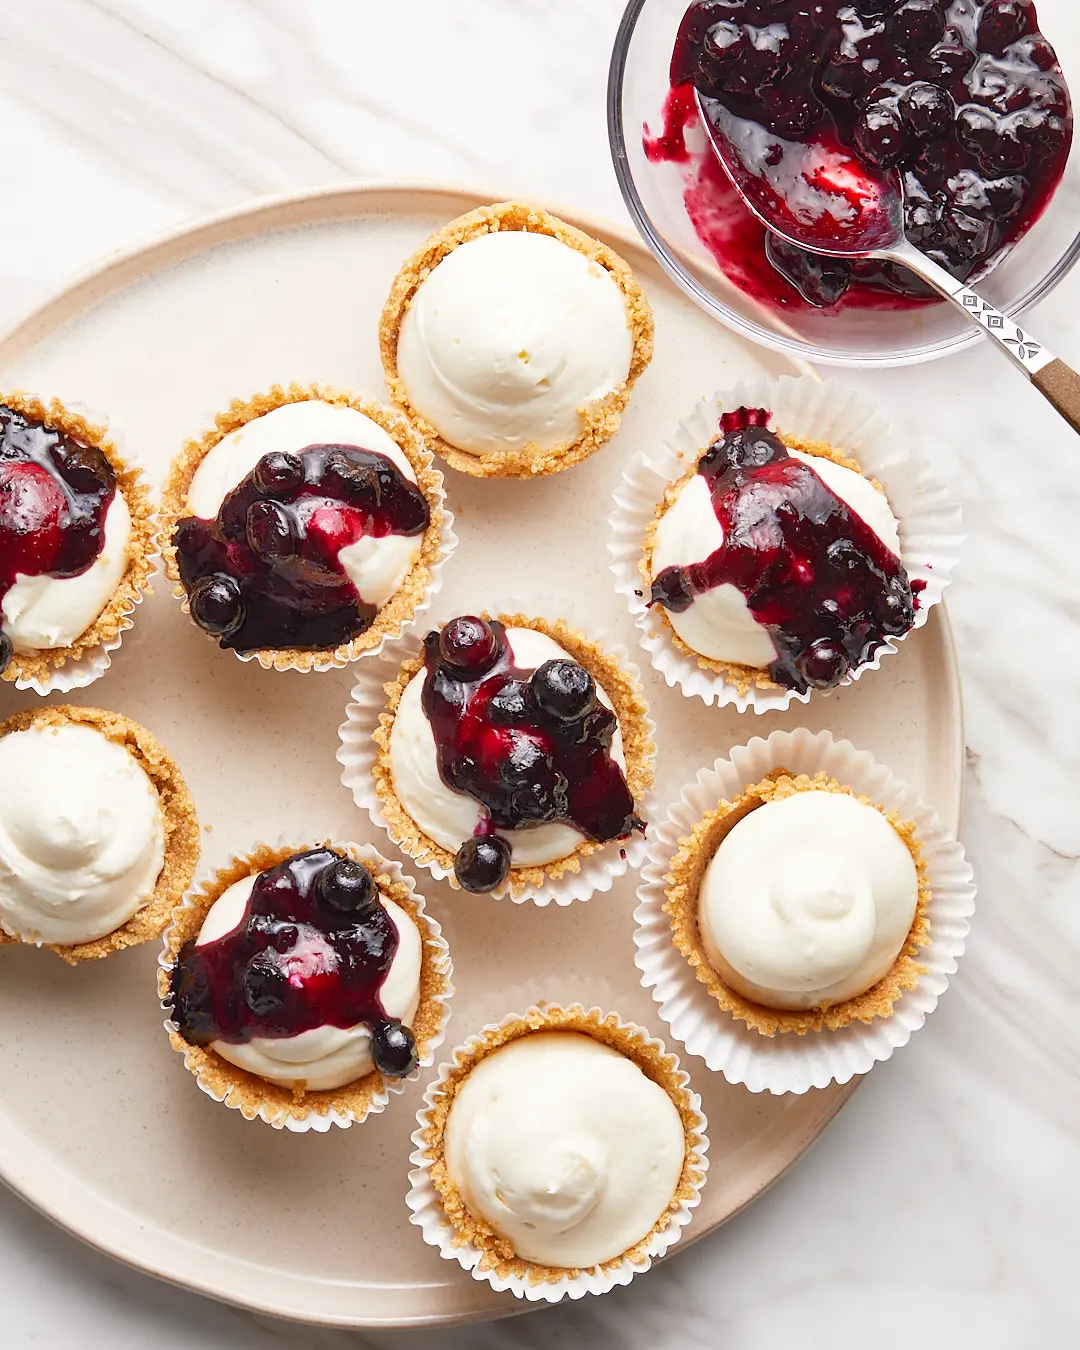 Mini no-bake cheesecakes topped with a blueberry compote on a serving plate